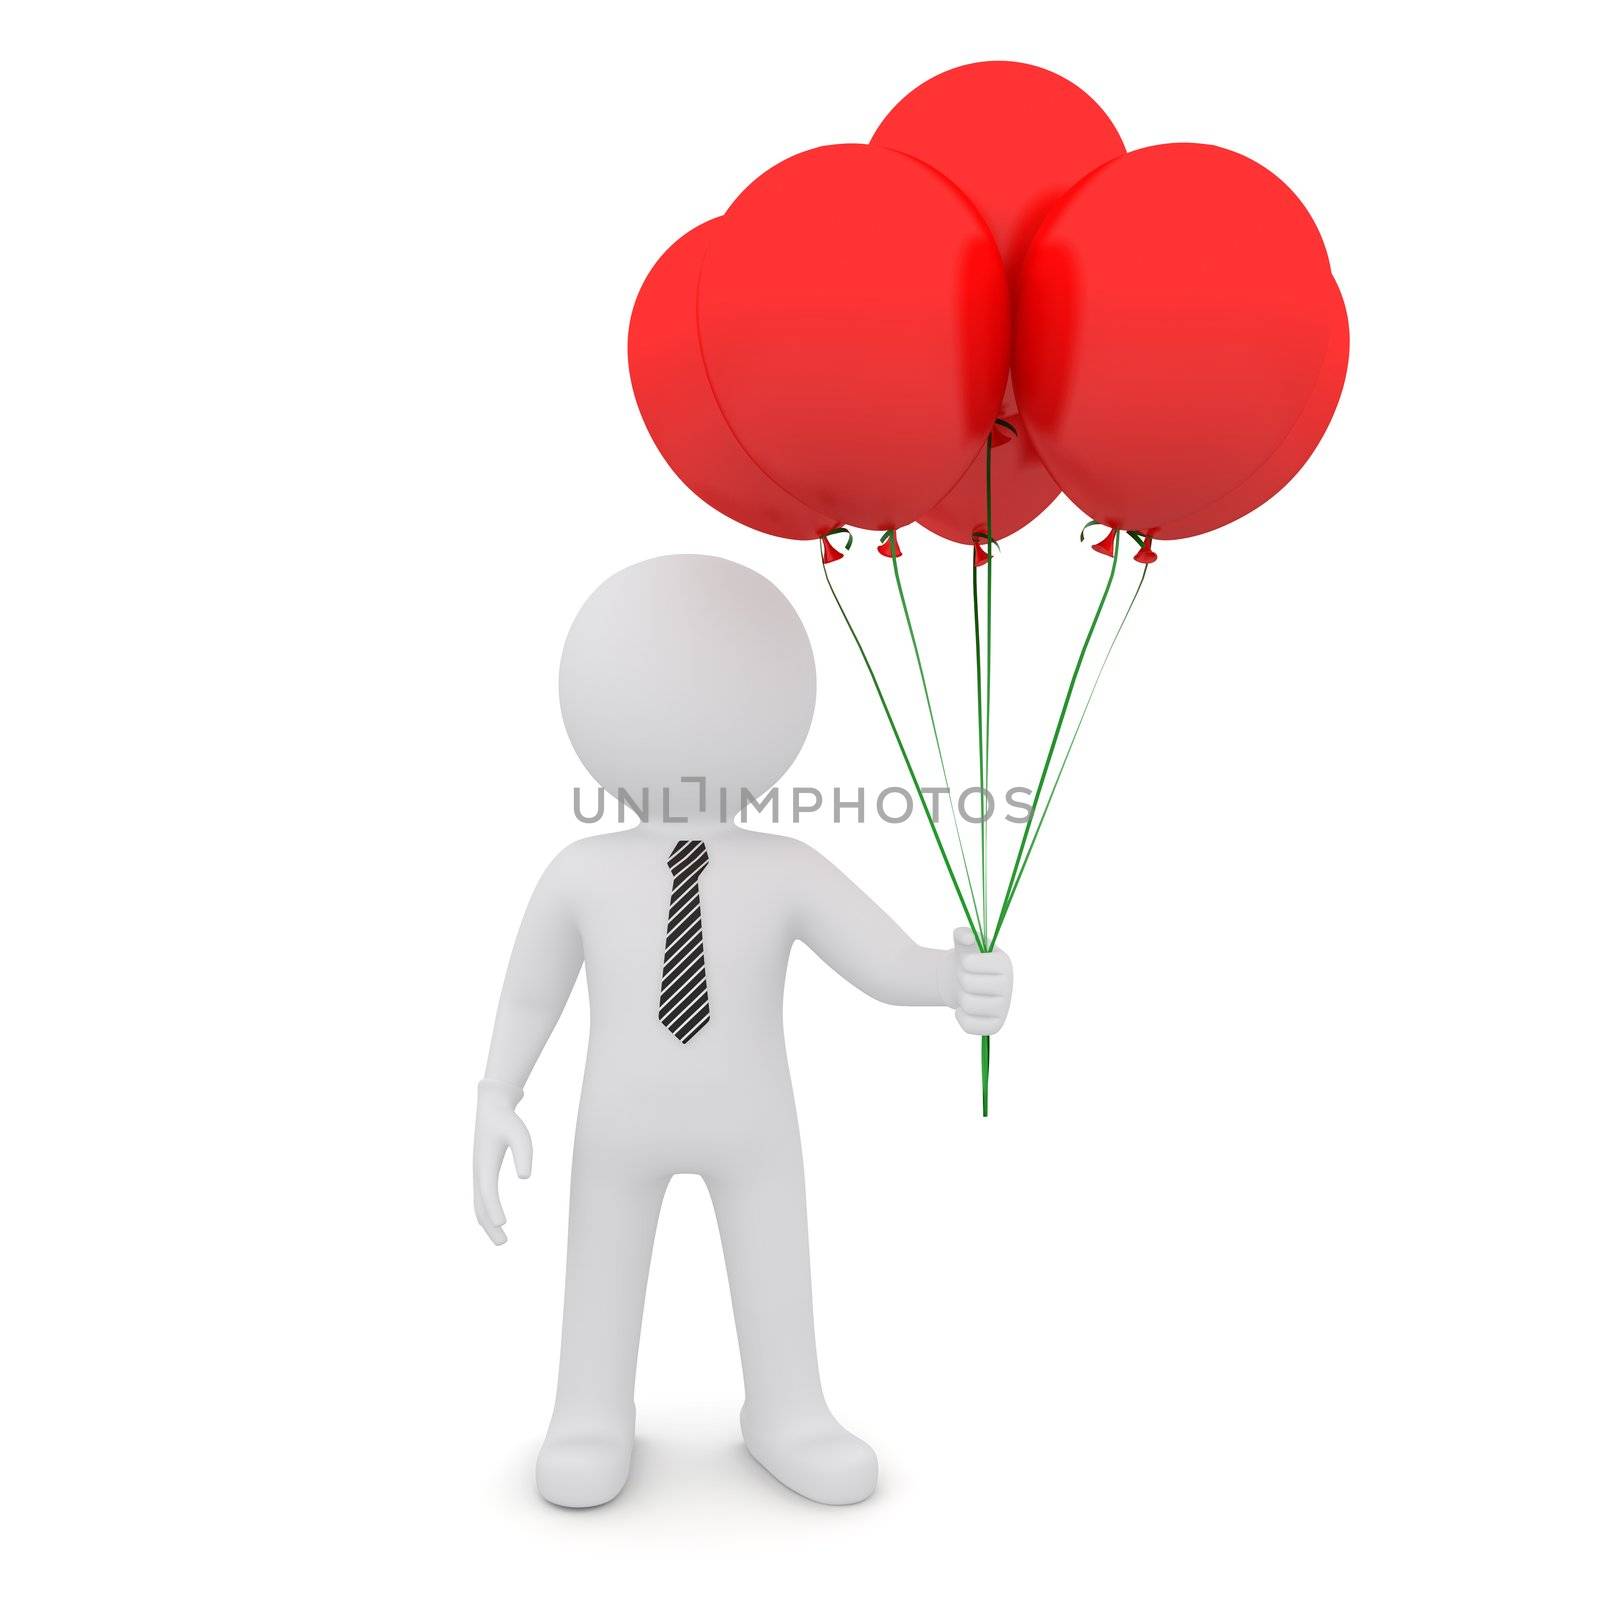 The white man is holding red balloons by cherezoff